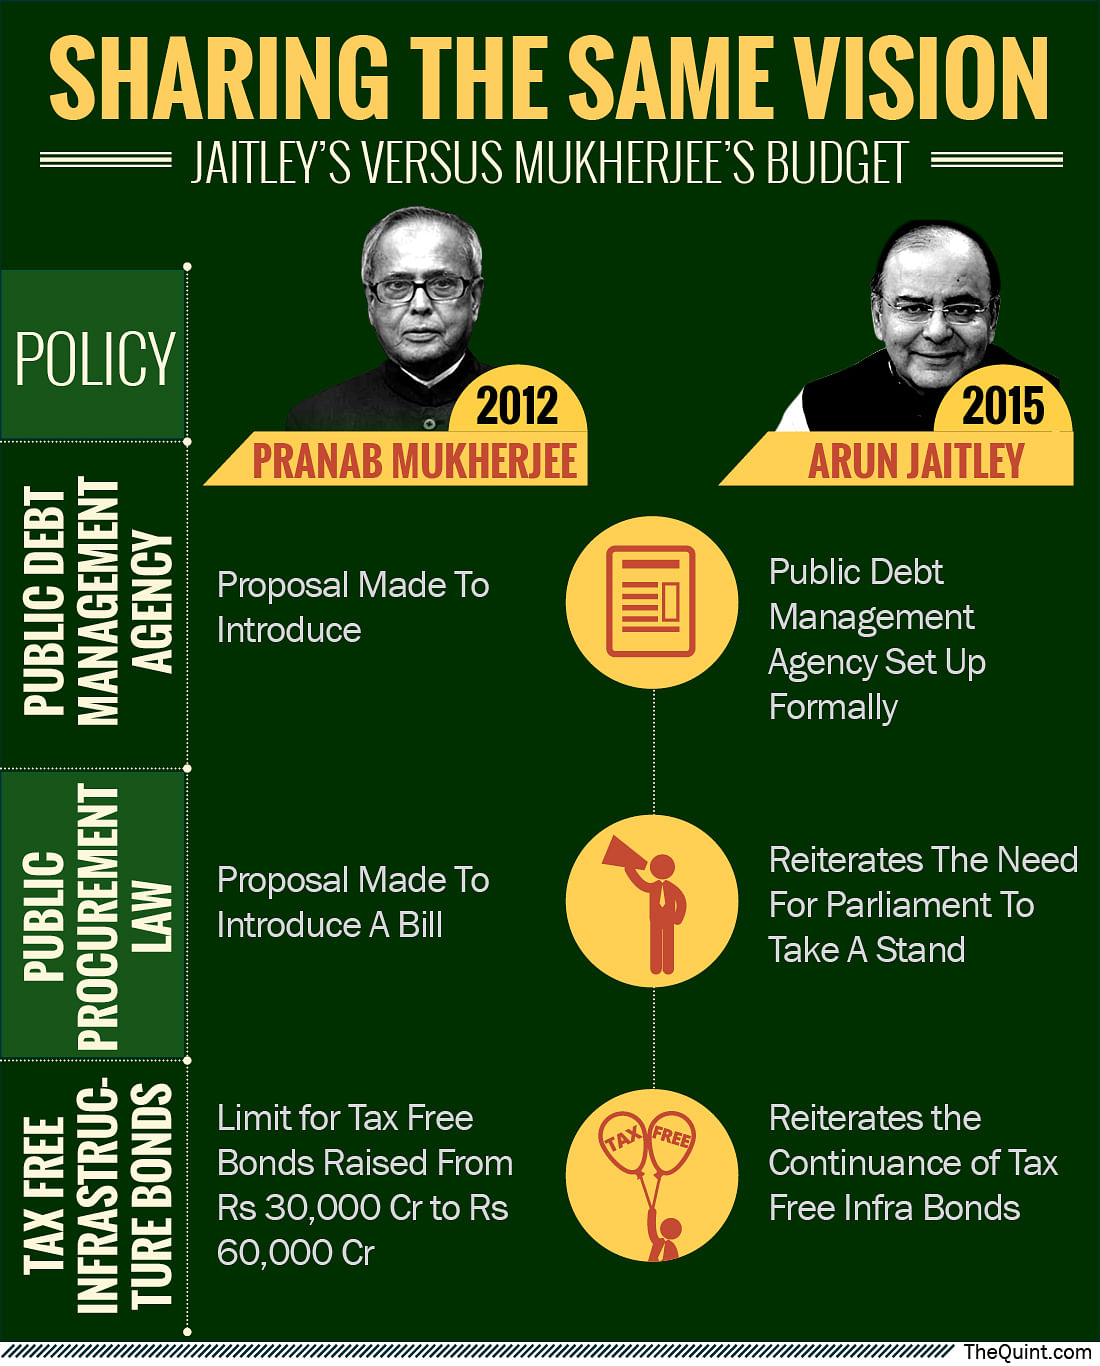 Building on what UPA had initiated has been the USP of Jaitley’s previous budget, will it be any different this time?